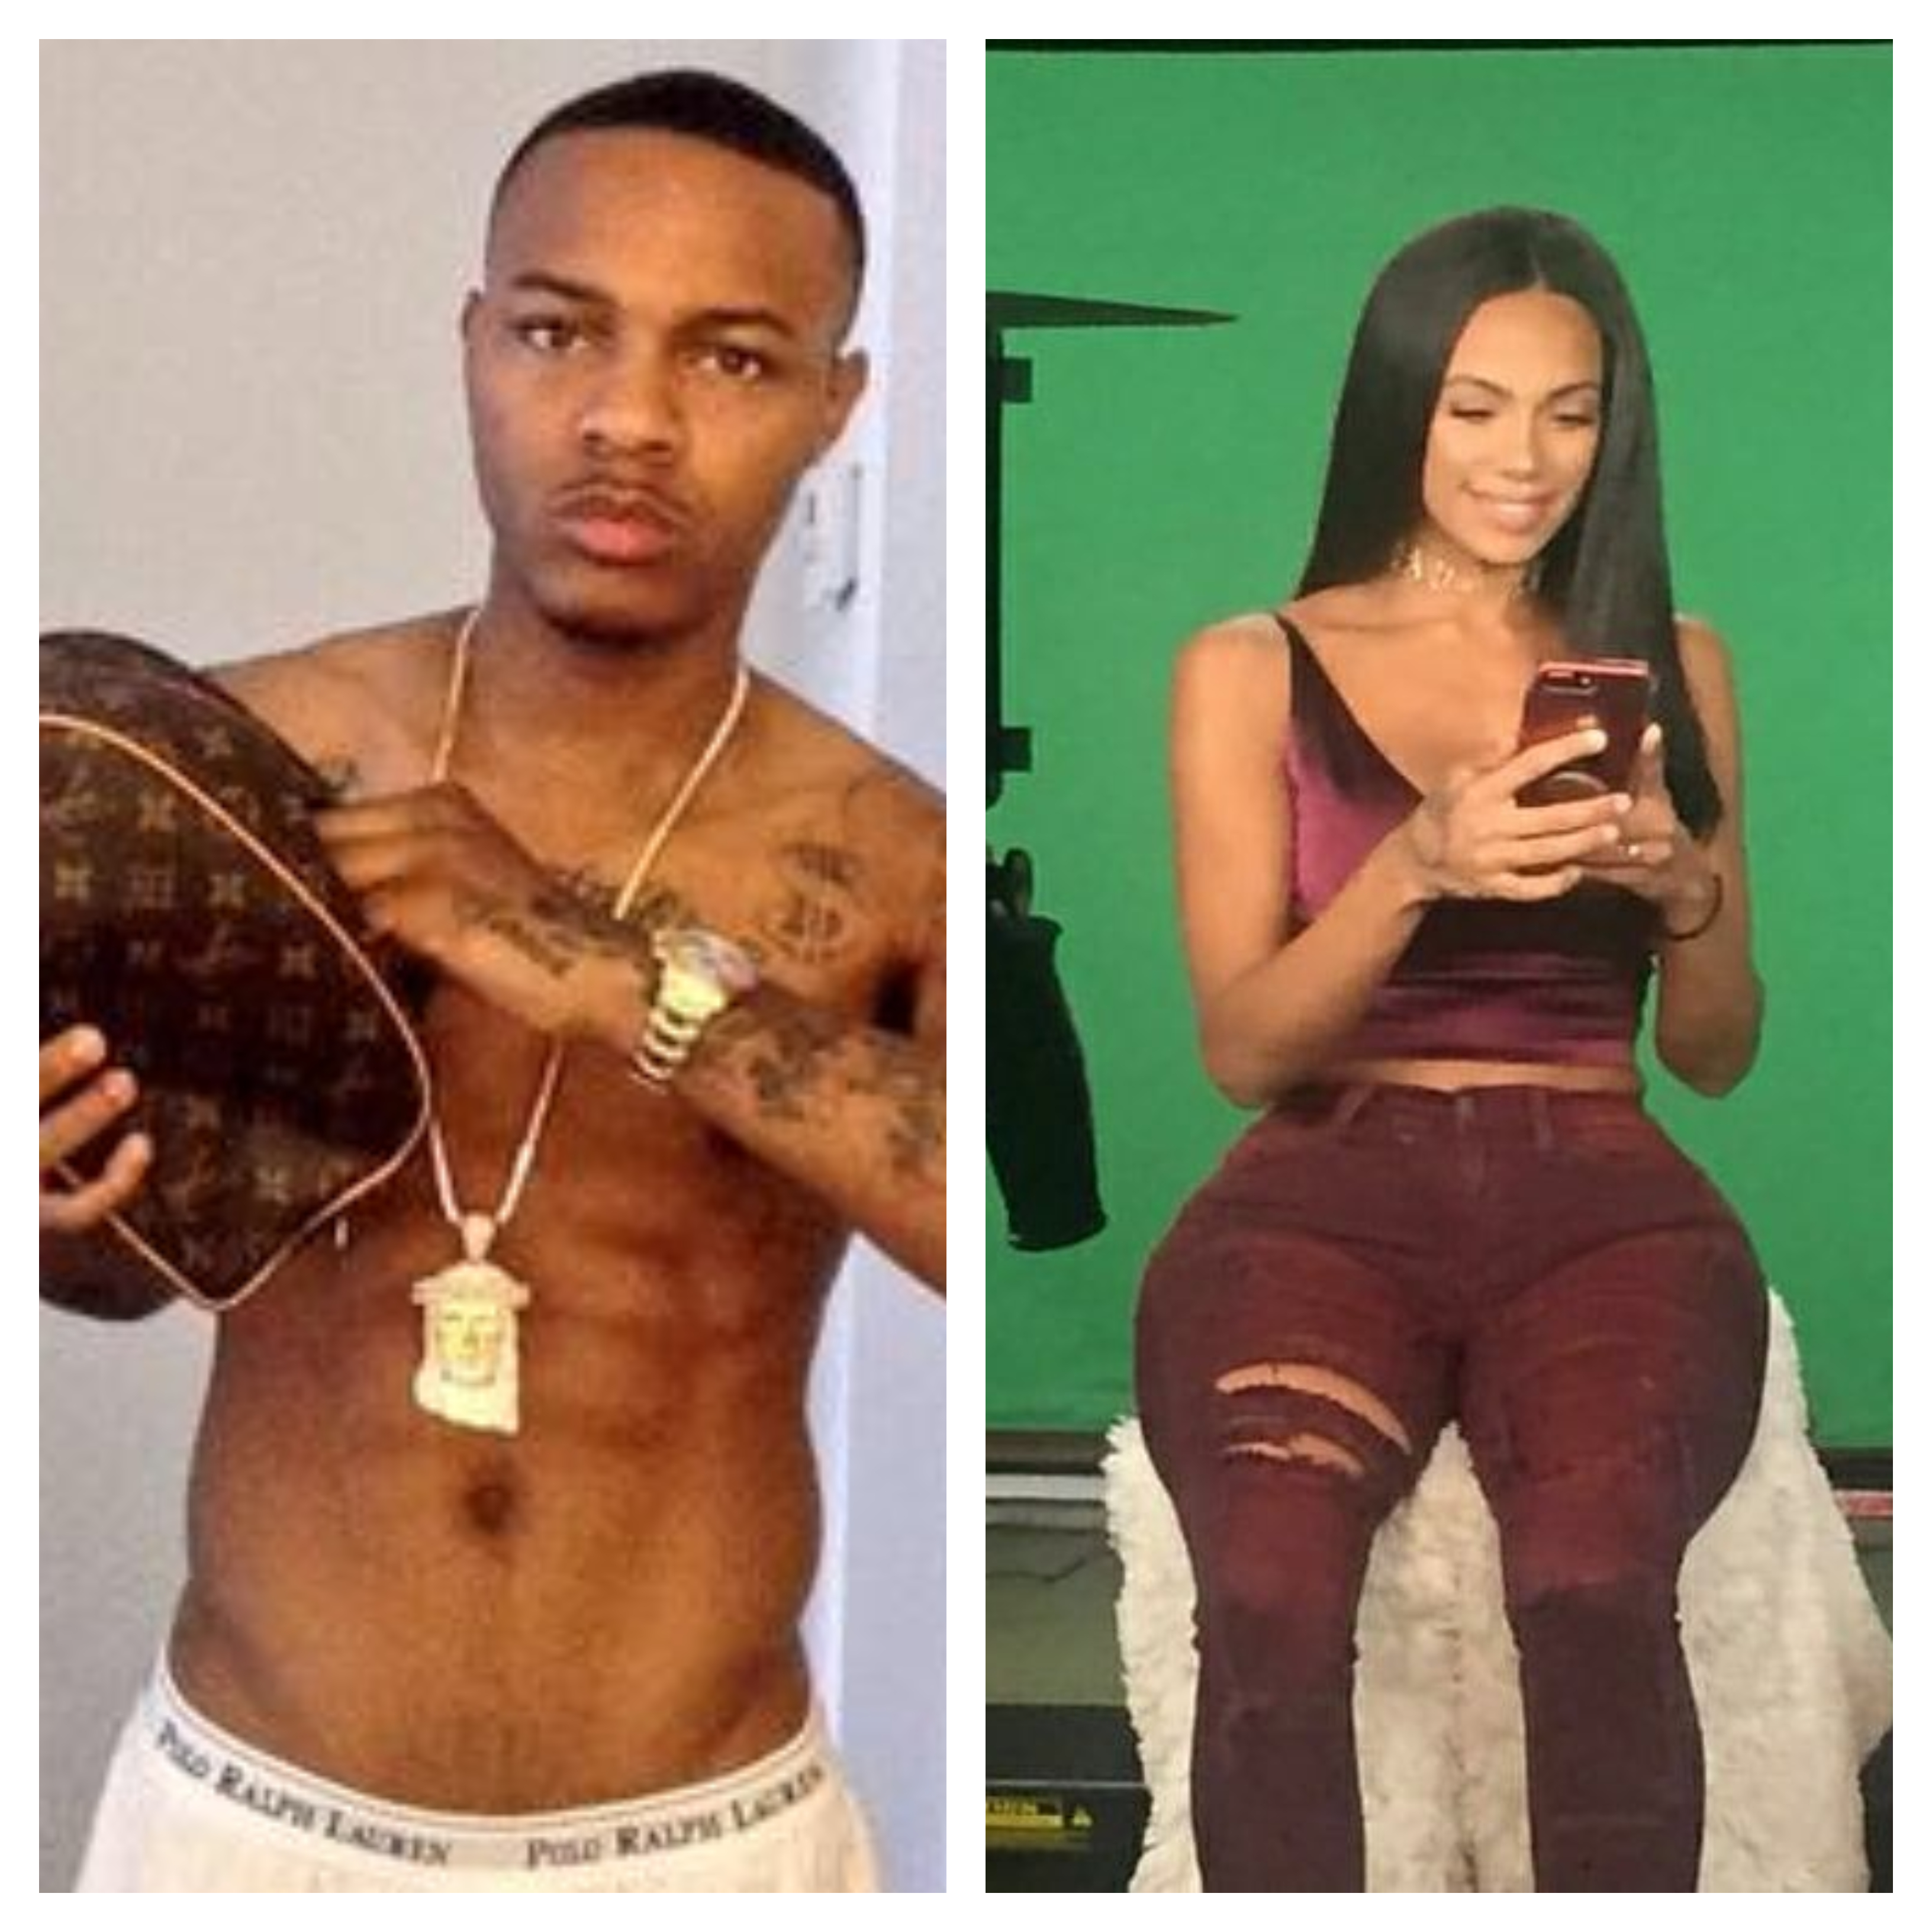 angie estes recommends erica mena naked pictures pic